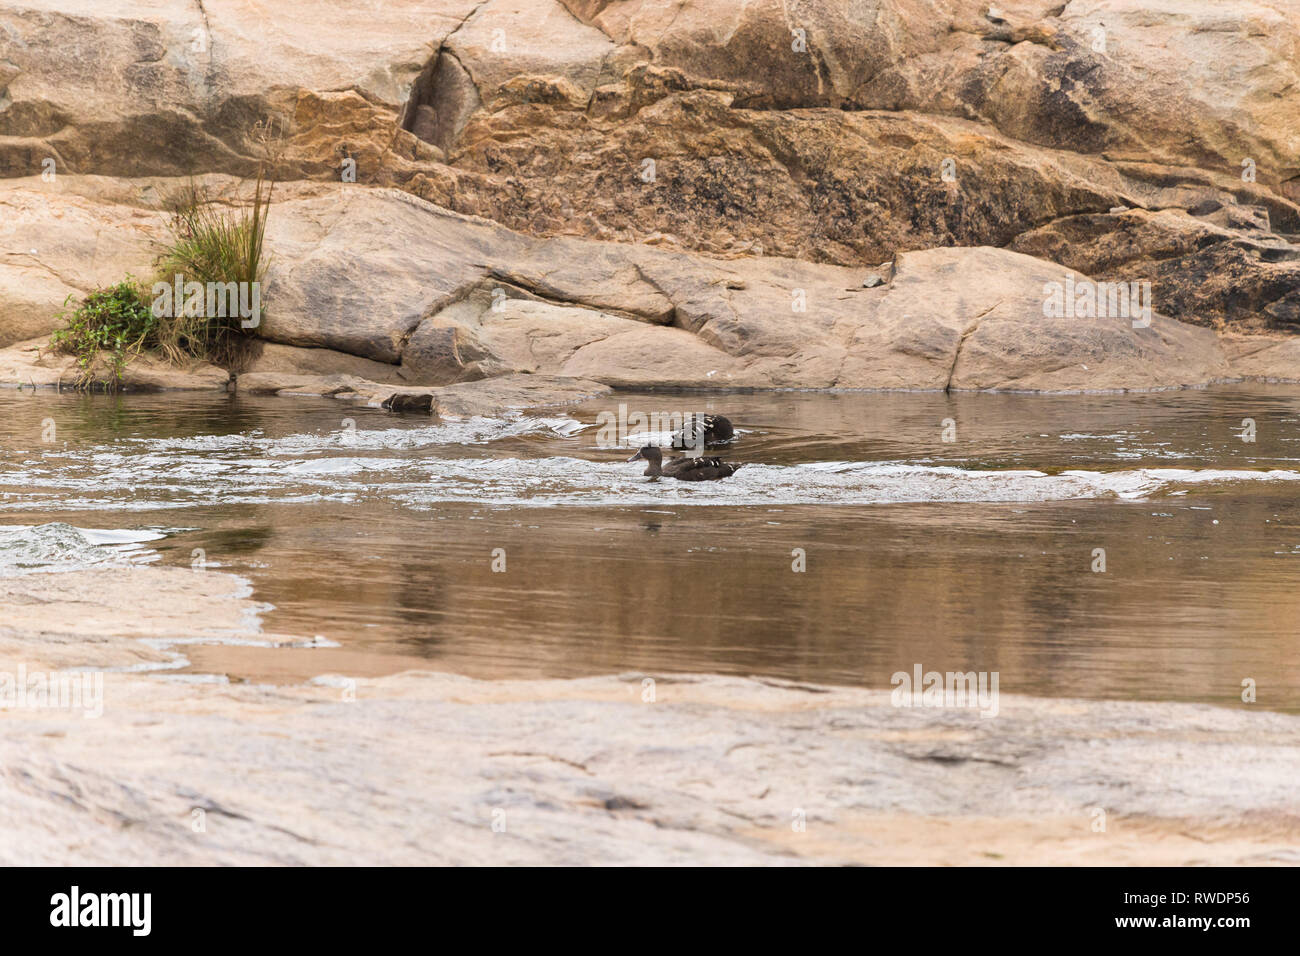 wallpaper of two ducks floating or swimming in the water of a river which is peaceful and gently flowing over some rocks with ripples and reflections Stock Photo